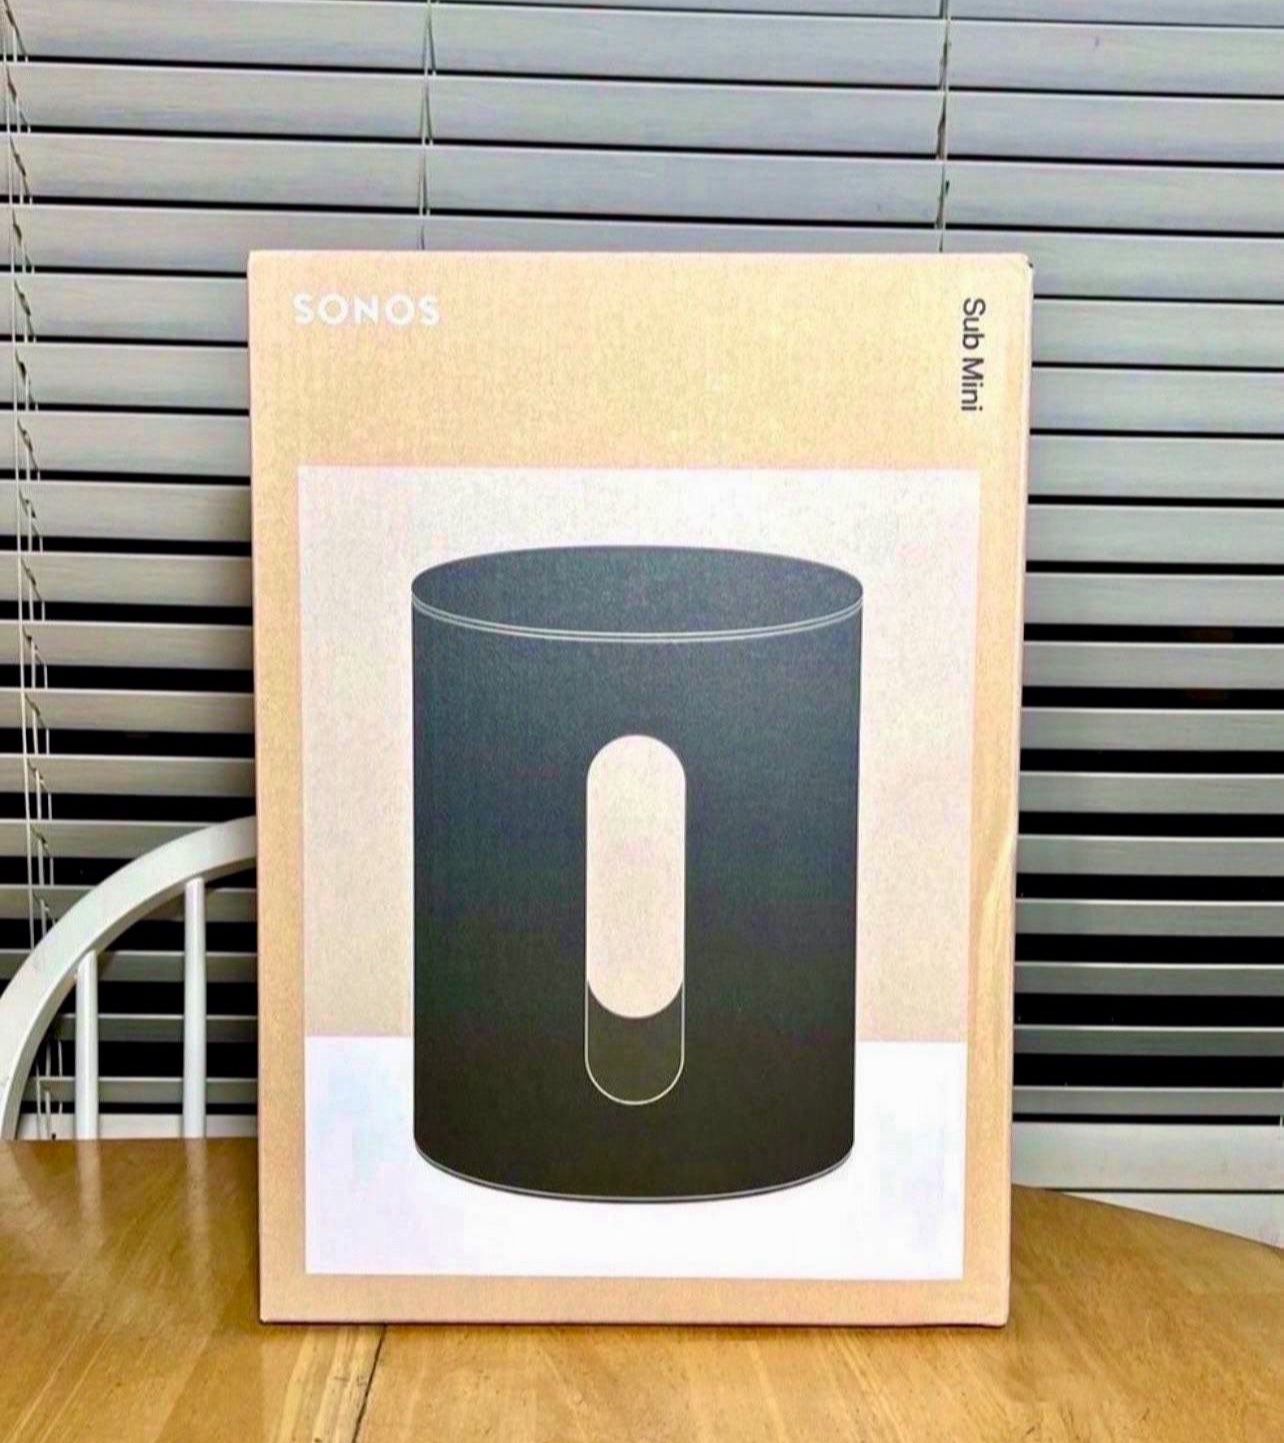 Sonos Sub Mini. Black. Brand New. Check Also My Other Sonos Listed Items.